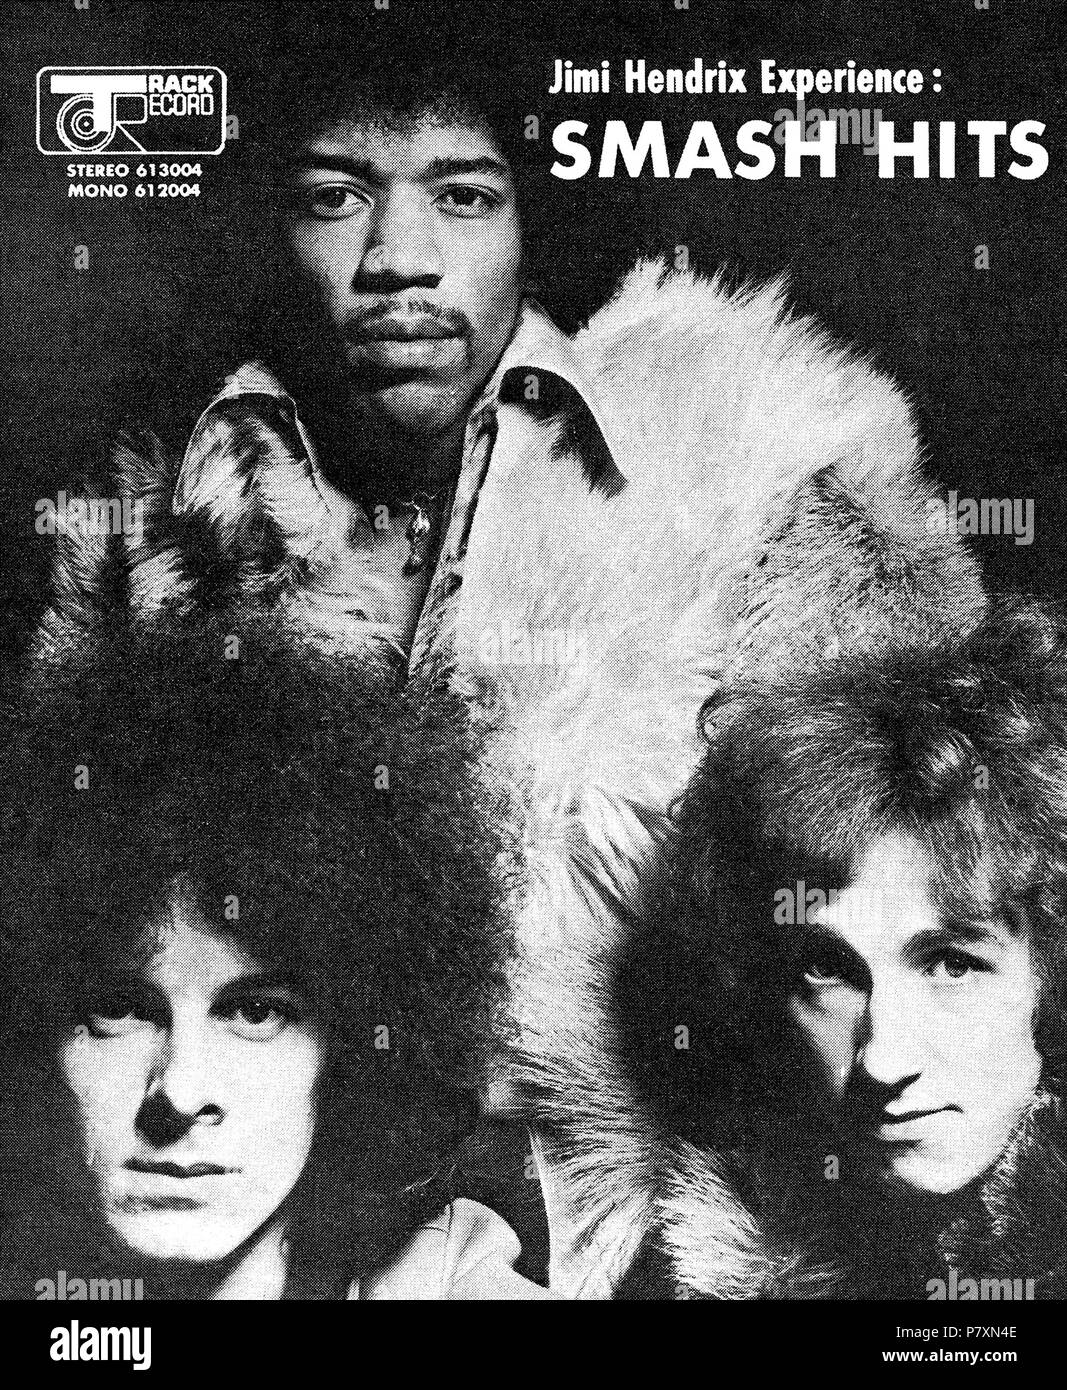 1968 British advertisement for the album Smash Hits by the Jimi Hendrix Experience on Track Records, showing Jimi Hendrix, Noel Redding and Mitch Mitchell. Stock Photo